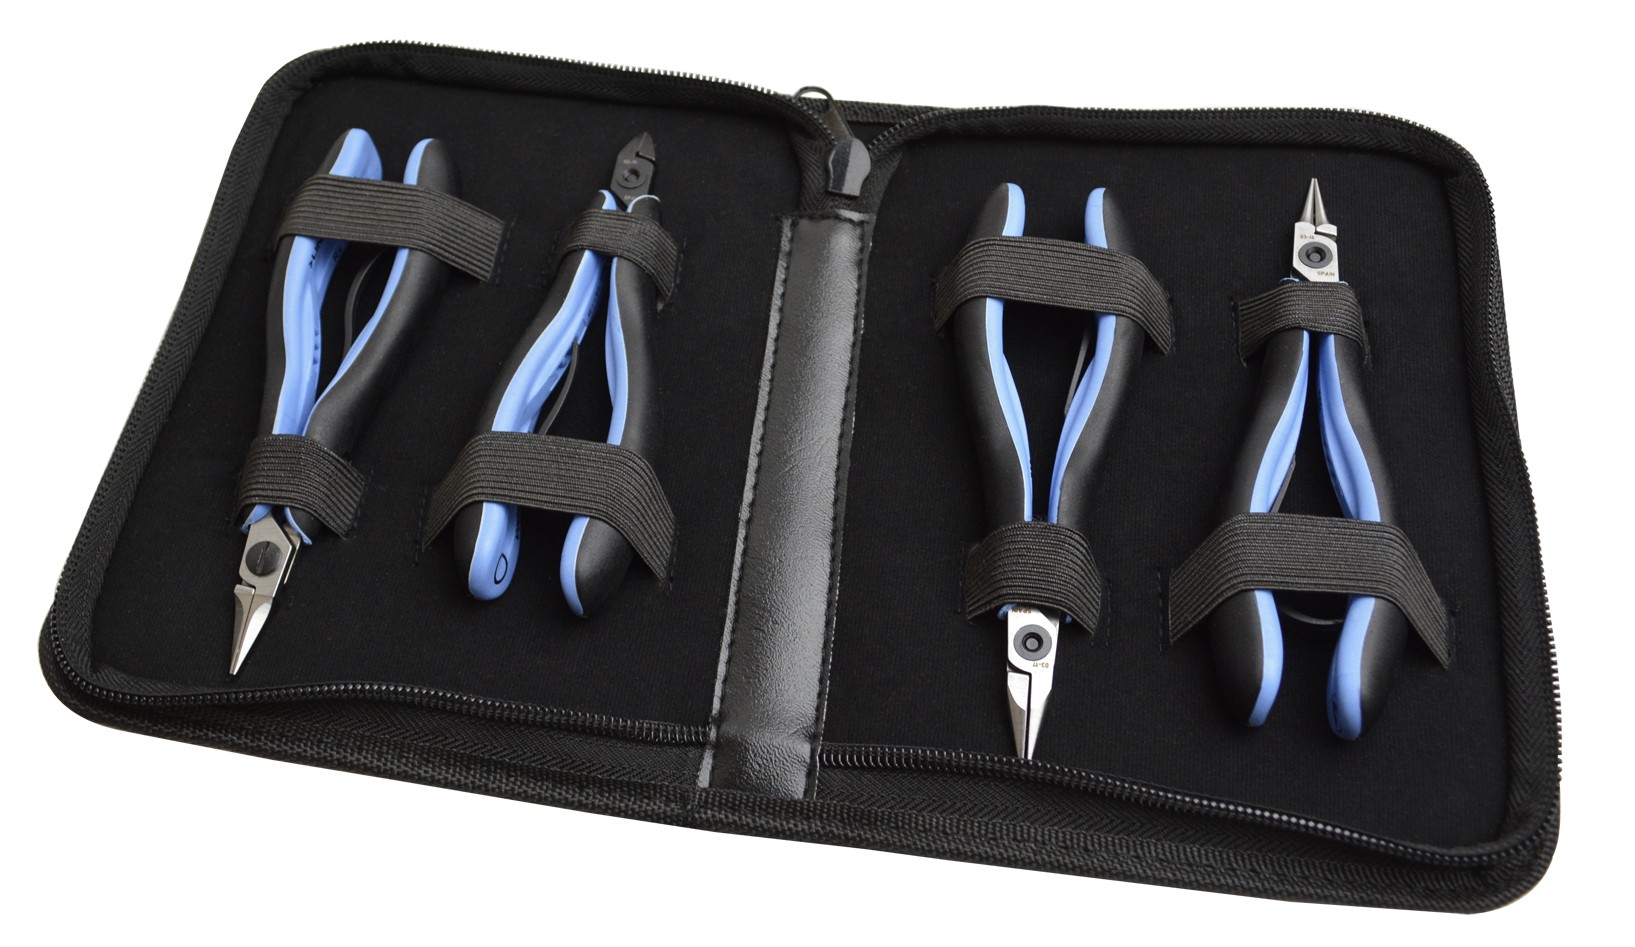 4-Piece Lindstrom RX Plier Kit with RX7490, RX7590, RX7893, and RX8141 Pliers